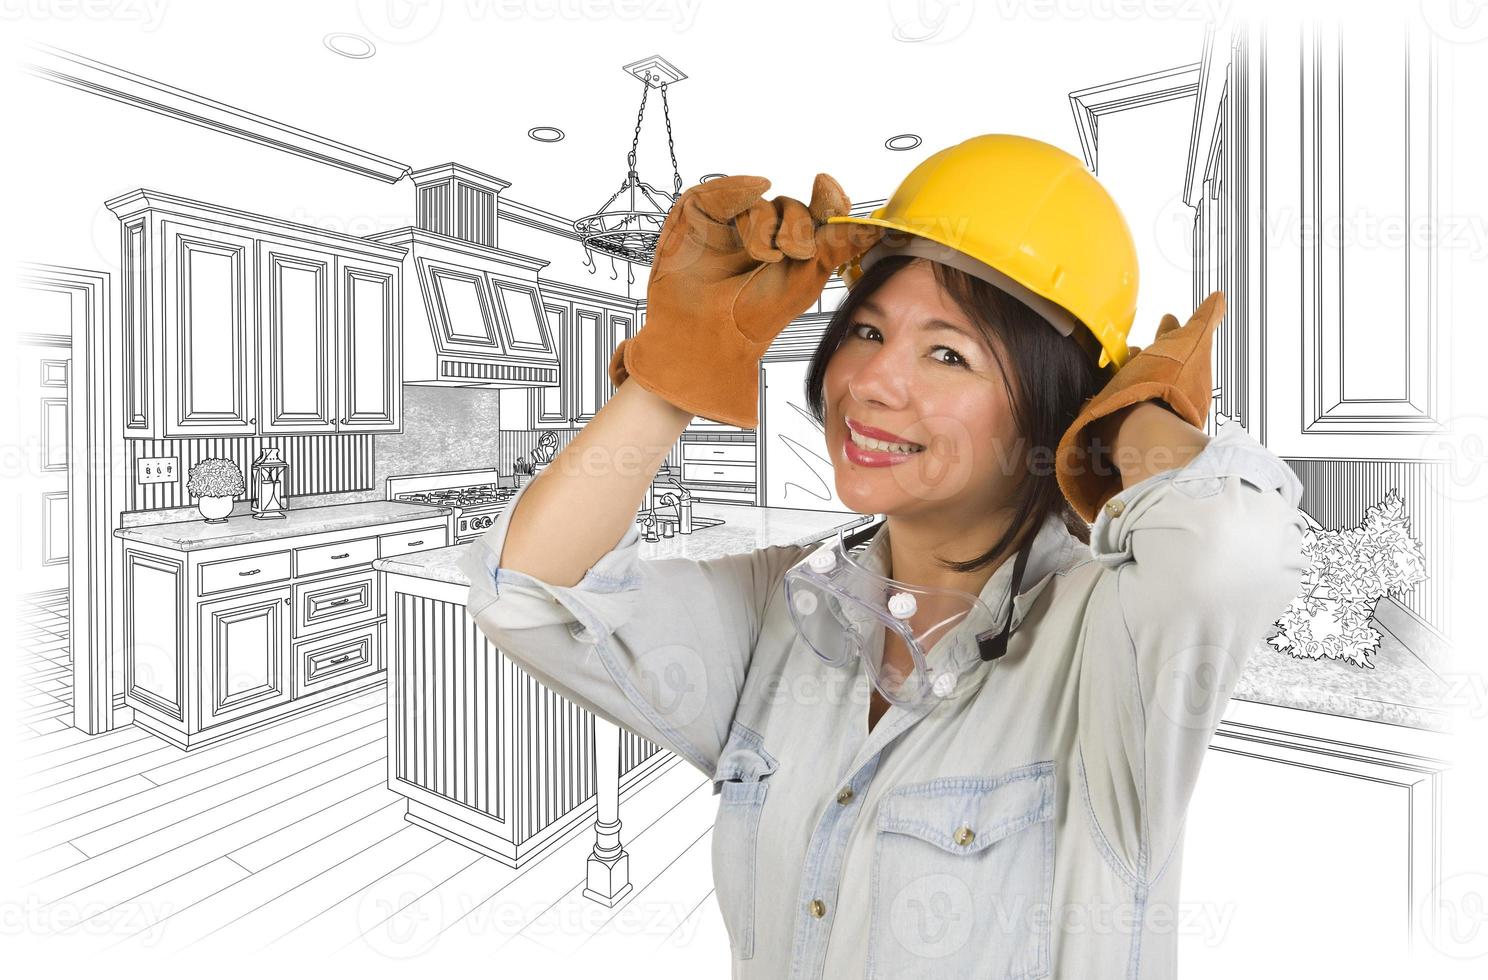 Hispanic Woman in Hard Hat with Kitchen Drawing Behind photo